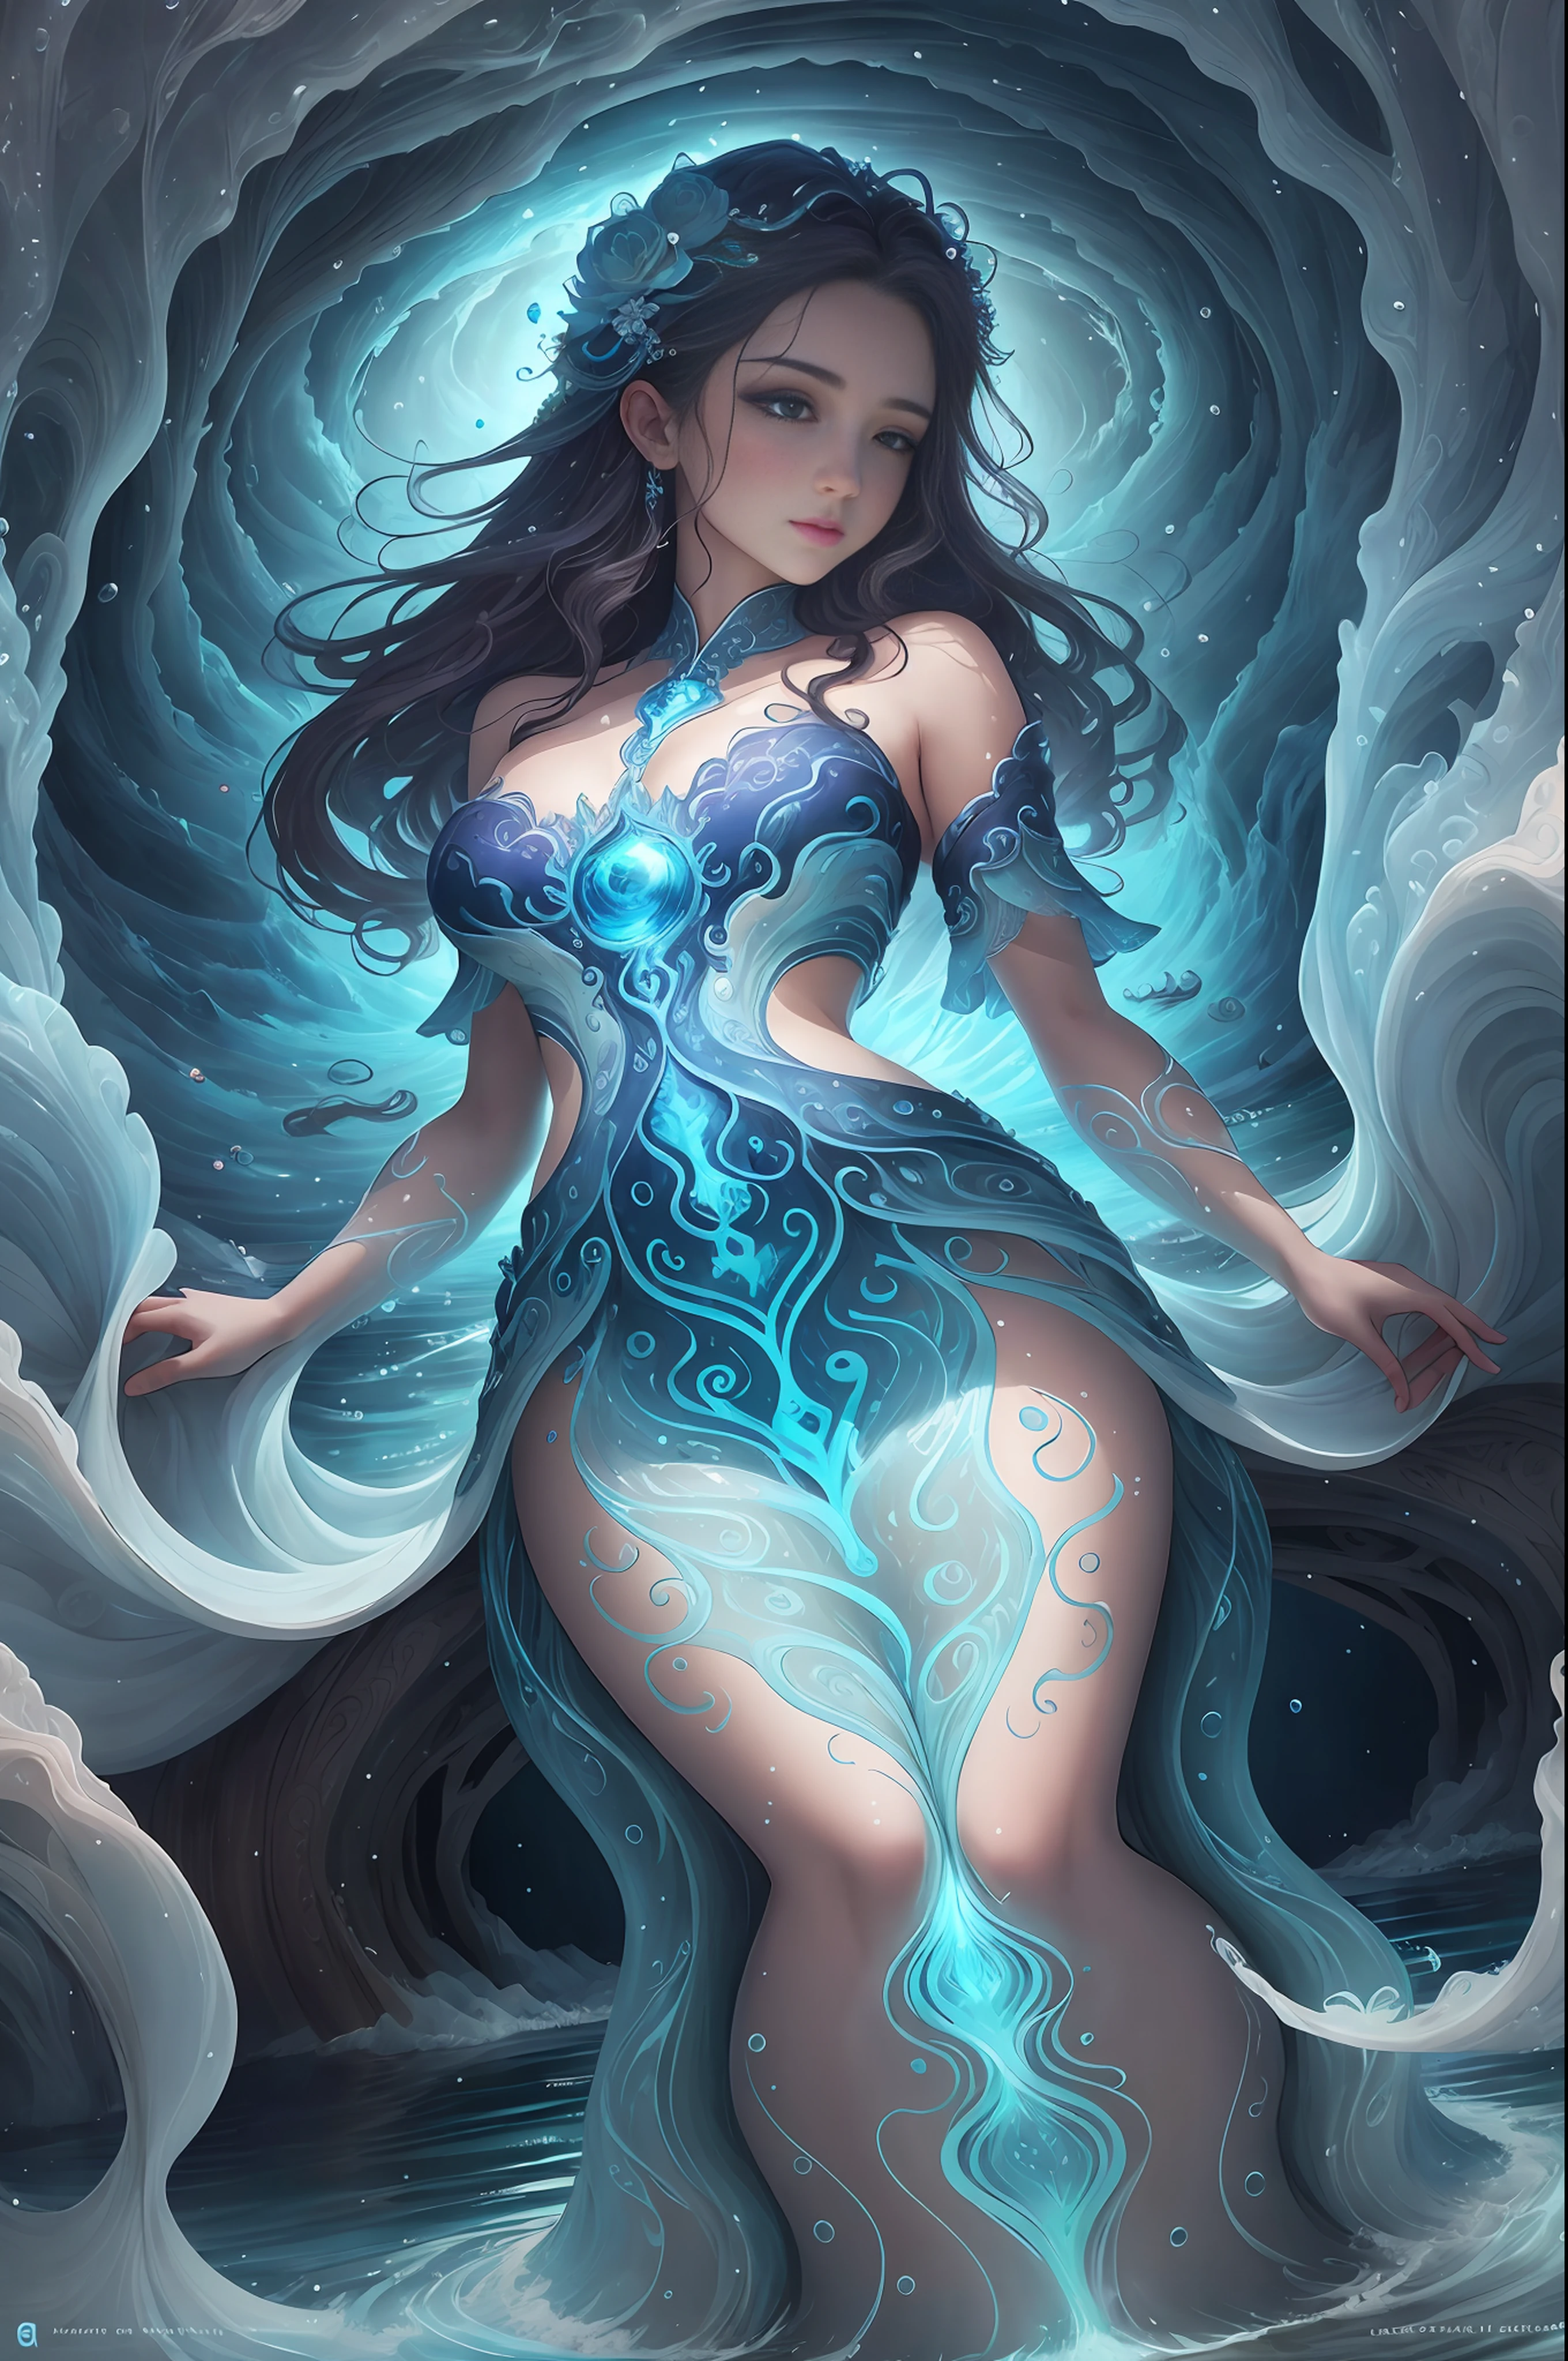 Water spirit in the form of a girl in attractive costume, born from natural rivers, lakes and seas, living in the flow and waves of water, guardian of water

It is a symbol of pure water, a source of life, and a symbol of purification and rebirth.

Have shades in harmony with nature, such as blue, light blue, and transparent.

It is shaped like a stream of water or waves, and is represented like a fairy living by a beautiful waterside.

It can change its appearance depending on the flow of water.

There is a backdrop depicting beautiful rivers, lakes and the sea

Hope to protect water resources and restore clean water, detailed beautiful face and eyes, big buttocks, bright white background, simple background, seen from below, masterpiece, highest quality, highest quality, official art, beautiful aesthetic, surreal, beautiful face, healthy figure, novel and unique style, beautiful hair, smooth skin, baby face